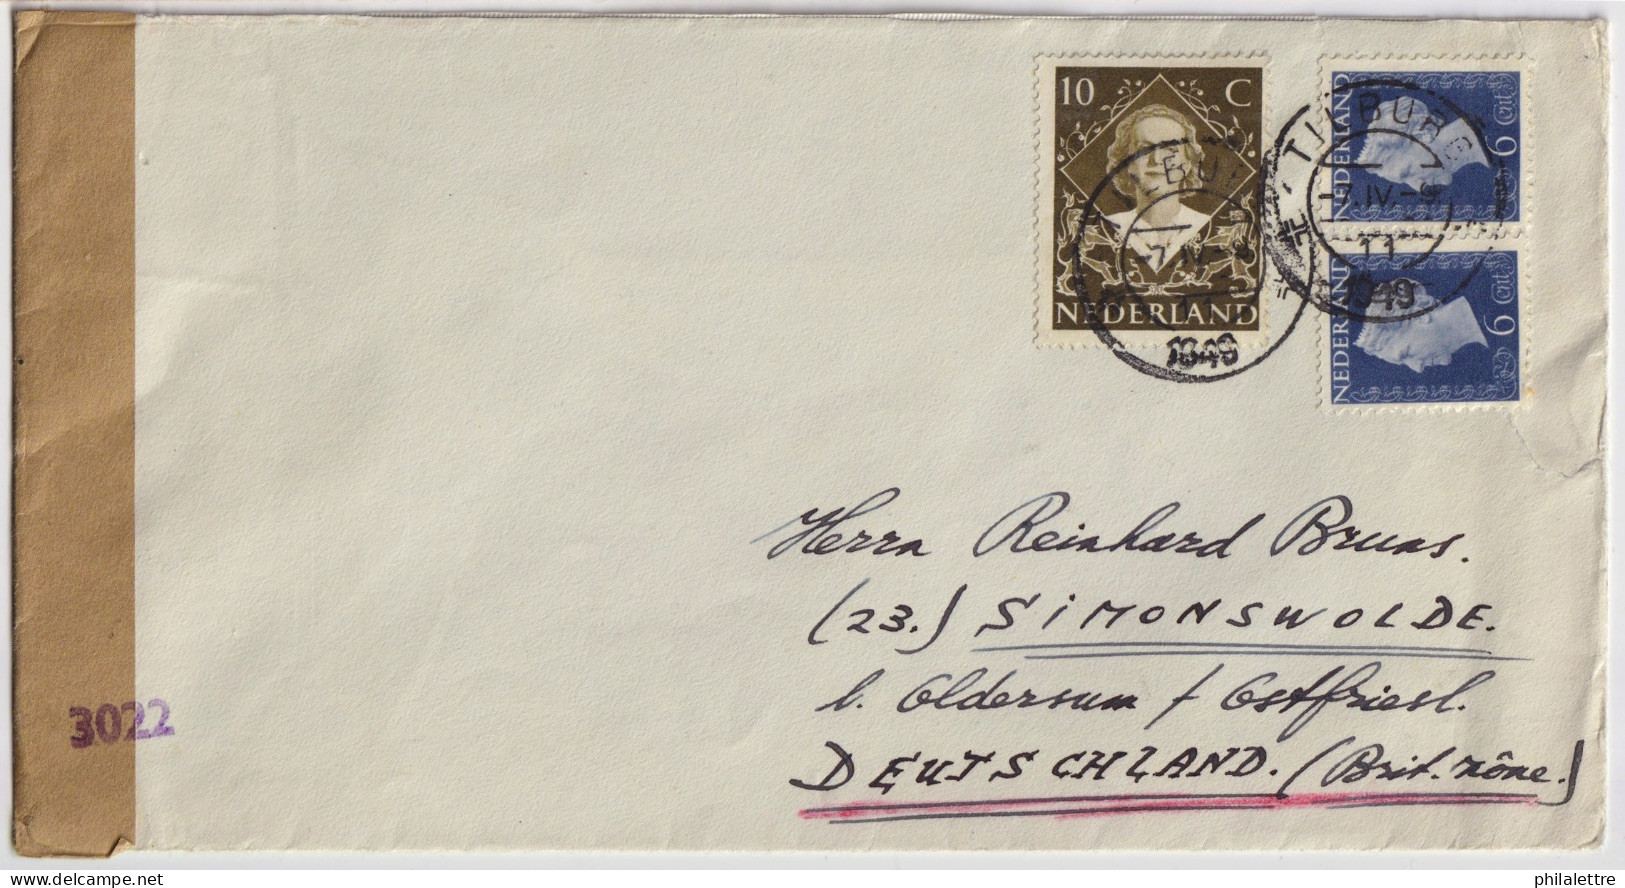 PAYS-BAS / THE NETHERLANDS - 1949 Mi.479 (x2) & Mi.609 On Censored Cover From TILBURG To SIMONSWOLDE, Germany - Storia Postale